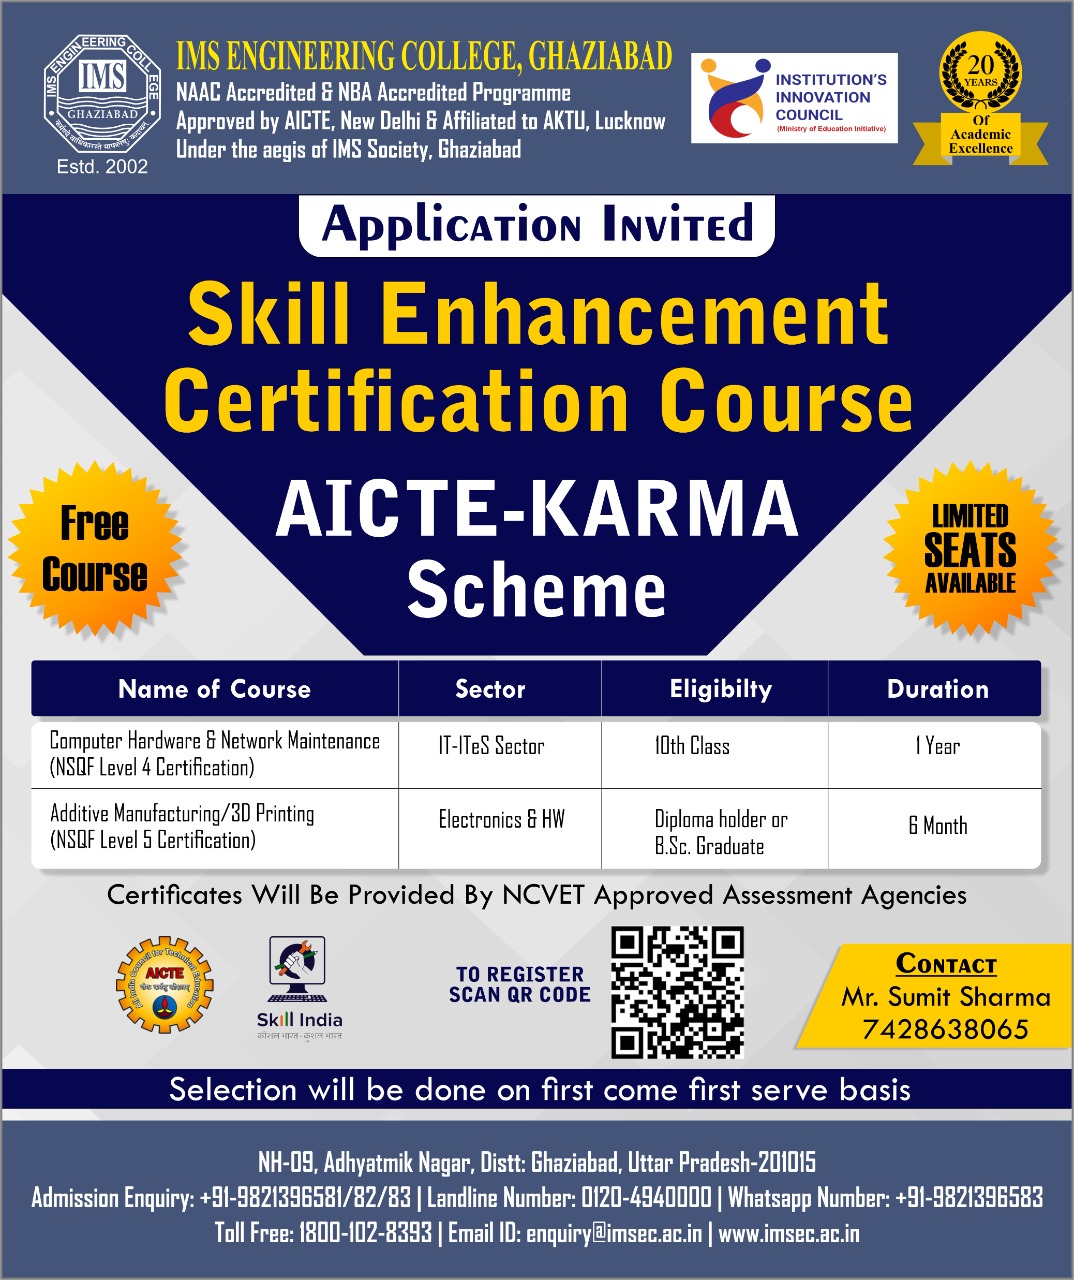 Skill Enhancement Certification courses for Socially/Financially deprived community under AICTE-KARMA Scheme.